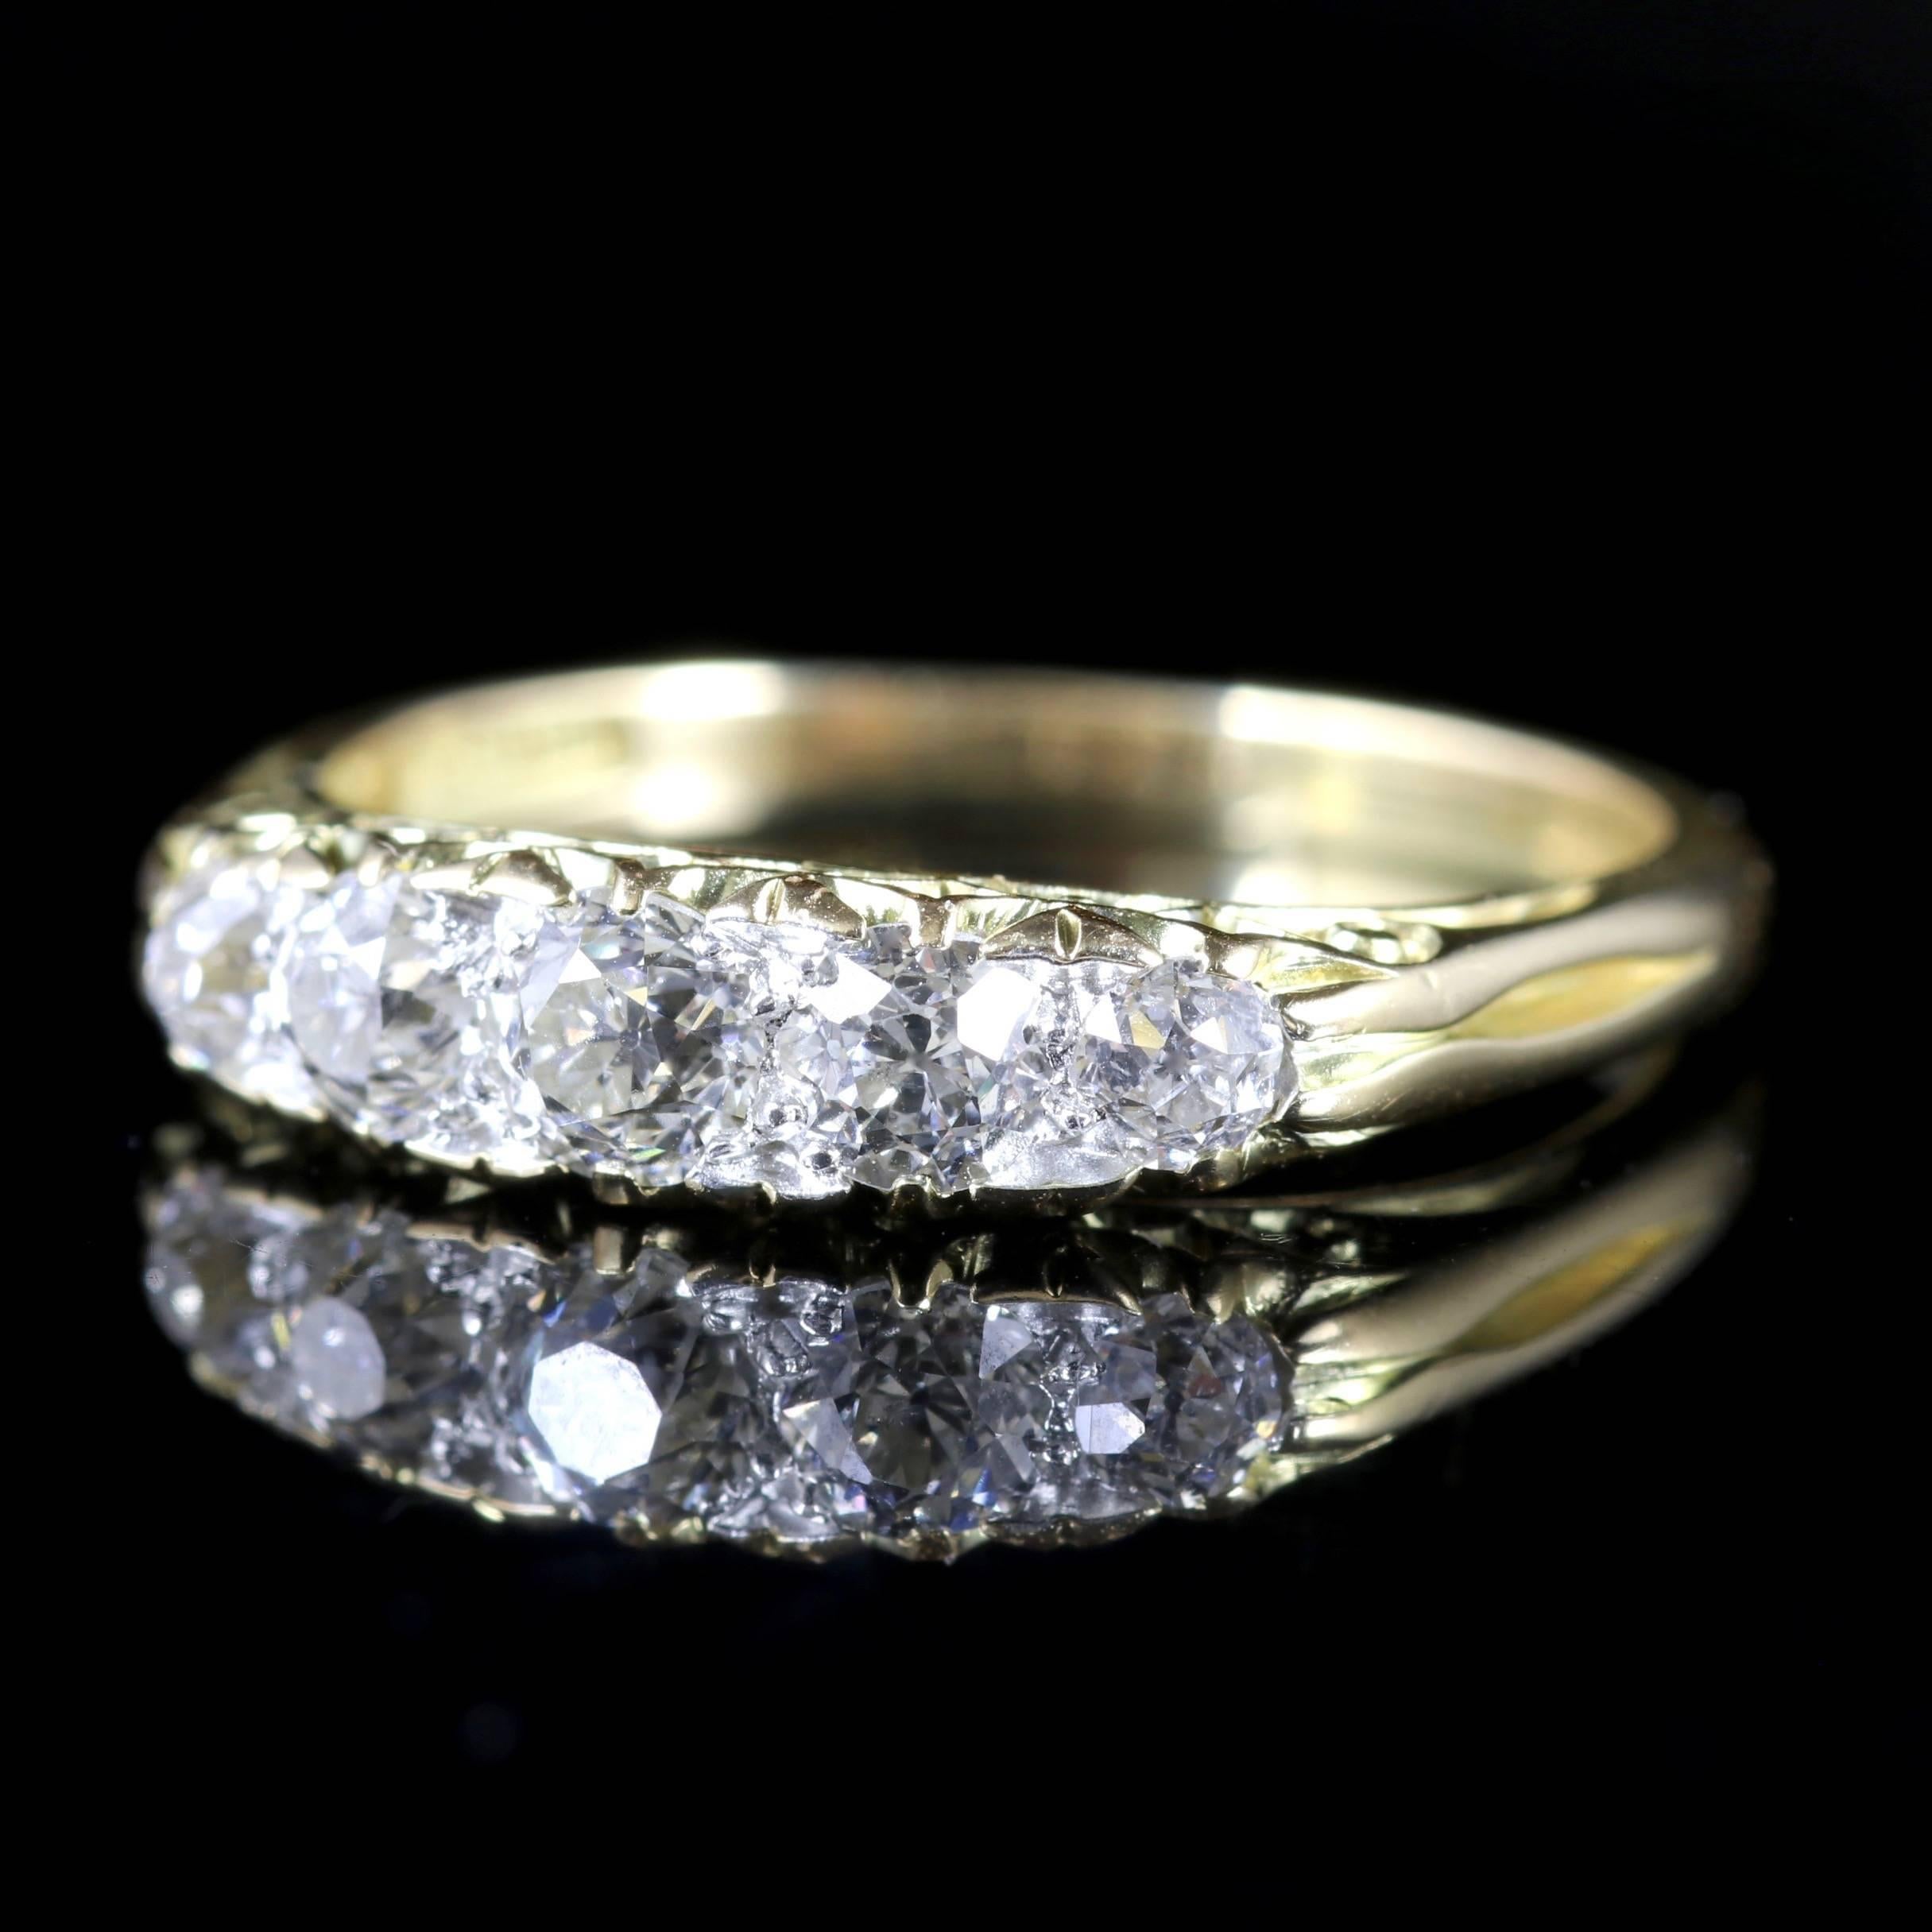 This fabulous antique Victorian Pave set Diamond ring is stunning, Circa 1880.

Five beautiful old cut Diamonds sit beautifully into the 18ct Yellow Gold gallery.

Set with approx. 1ct of Diamonds in total.

The Diamonds are a superb cut, colour and